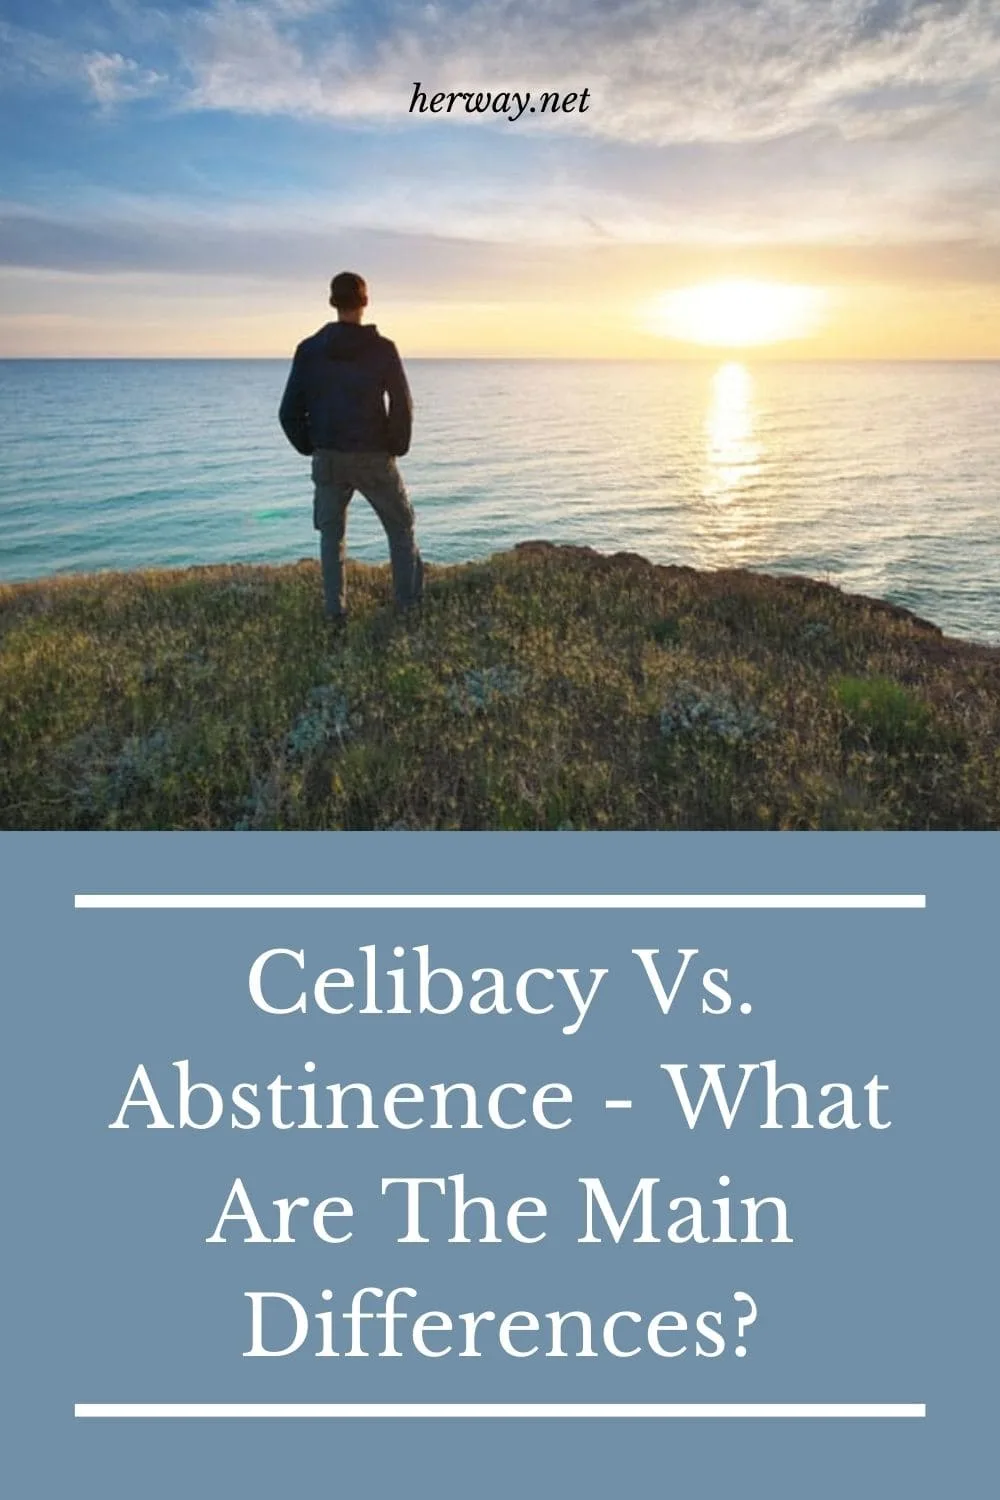 Celibacy Vs. Abstinence - What Are The Main Differences?